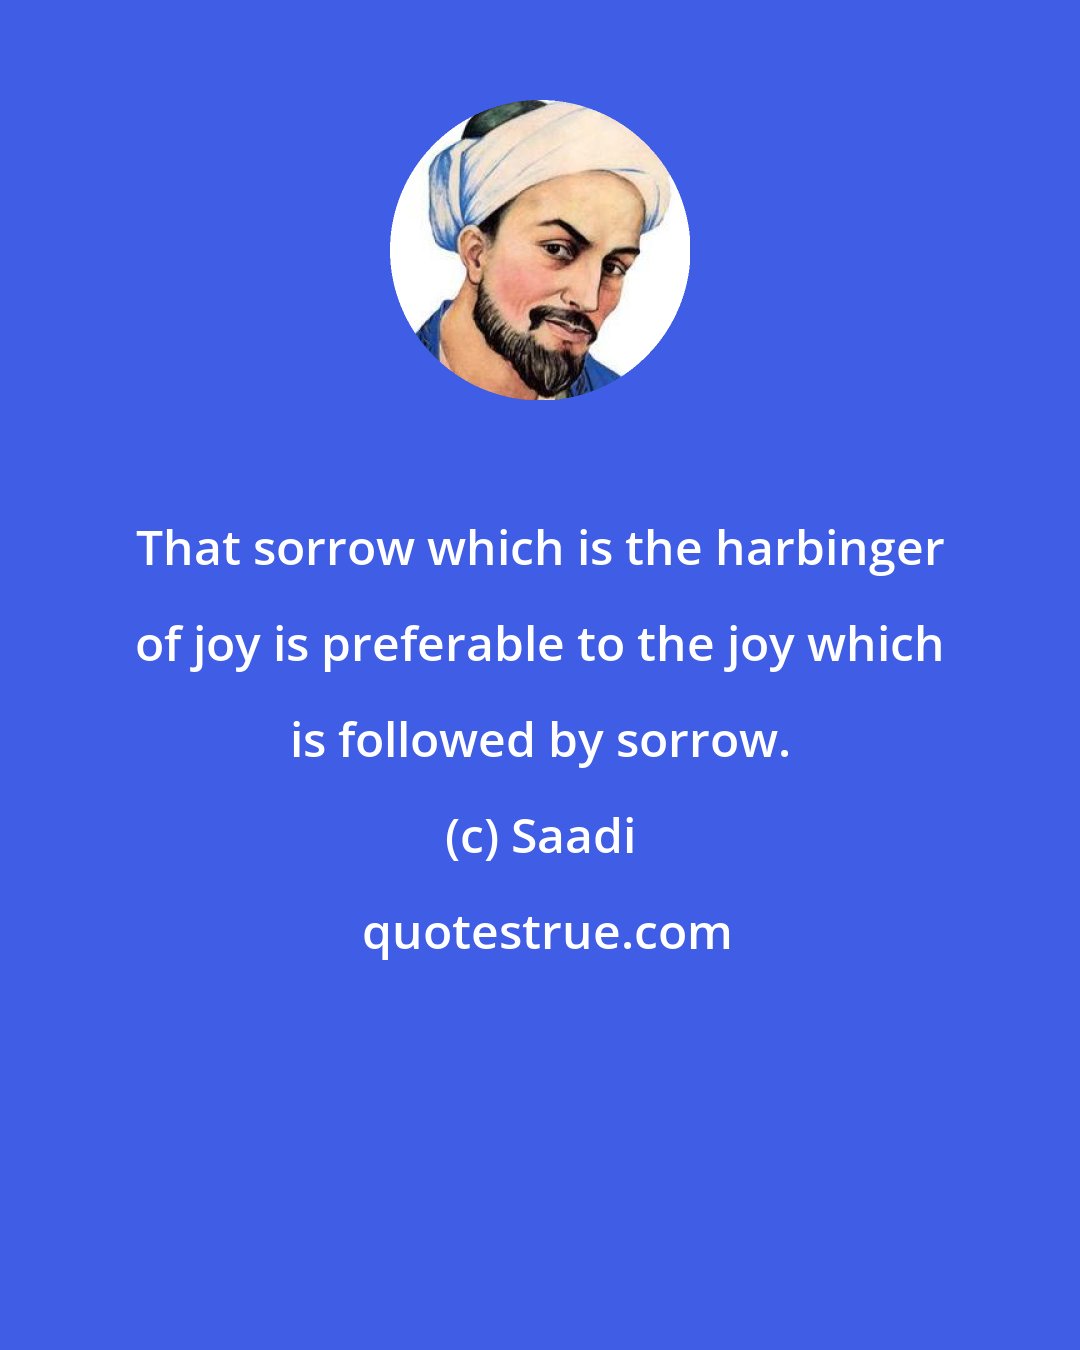 Saadi: That sorrow which is the harbinger of joy is preferable to the joy which is followed by sorrow.